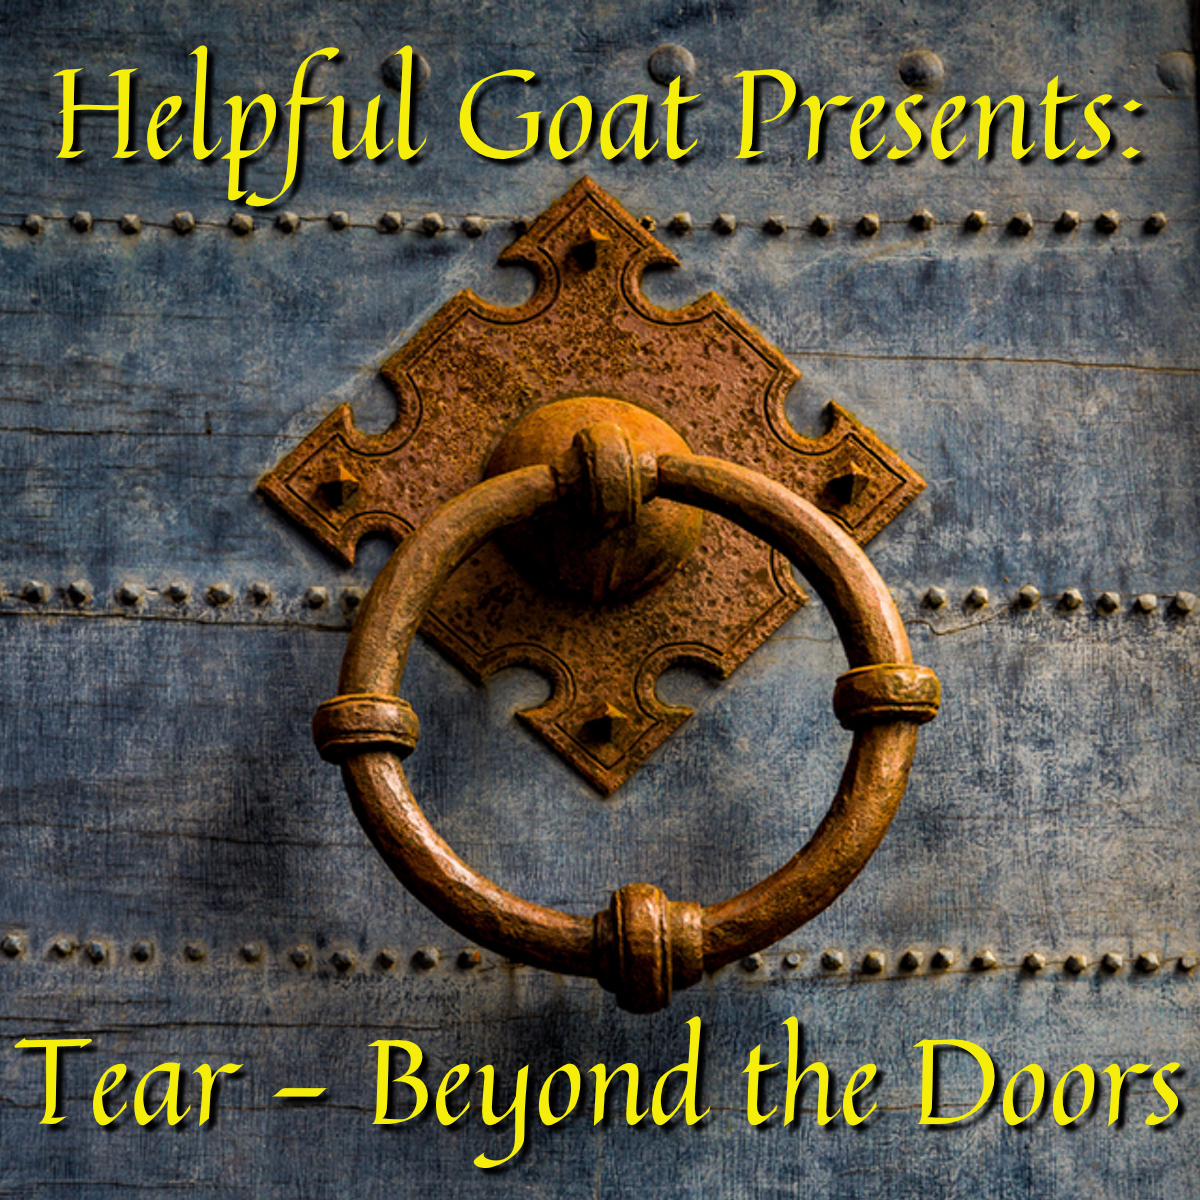 Tear: Beyond the Doors, Ep 31 - How Goes the Path?